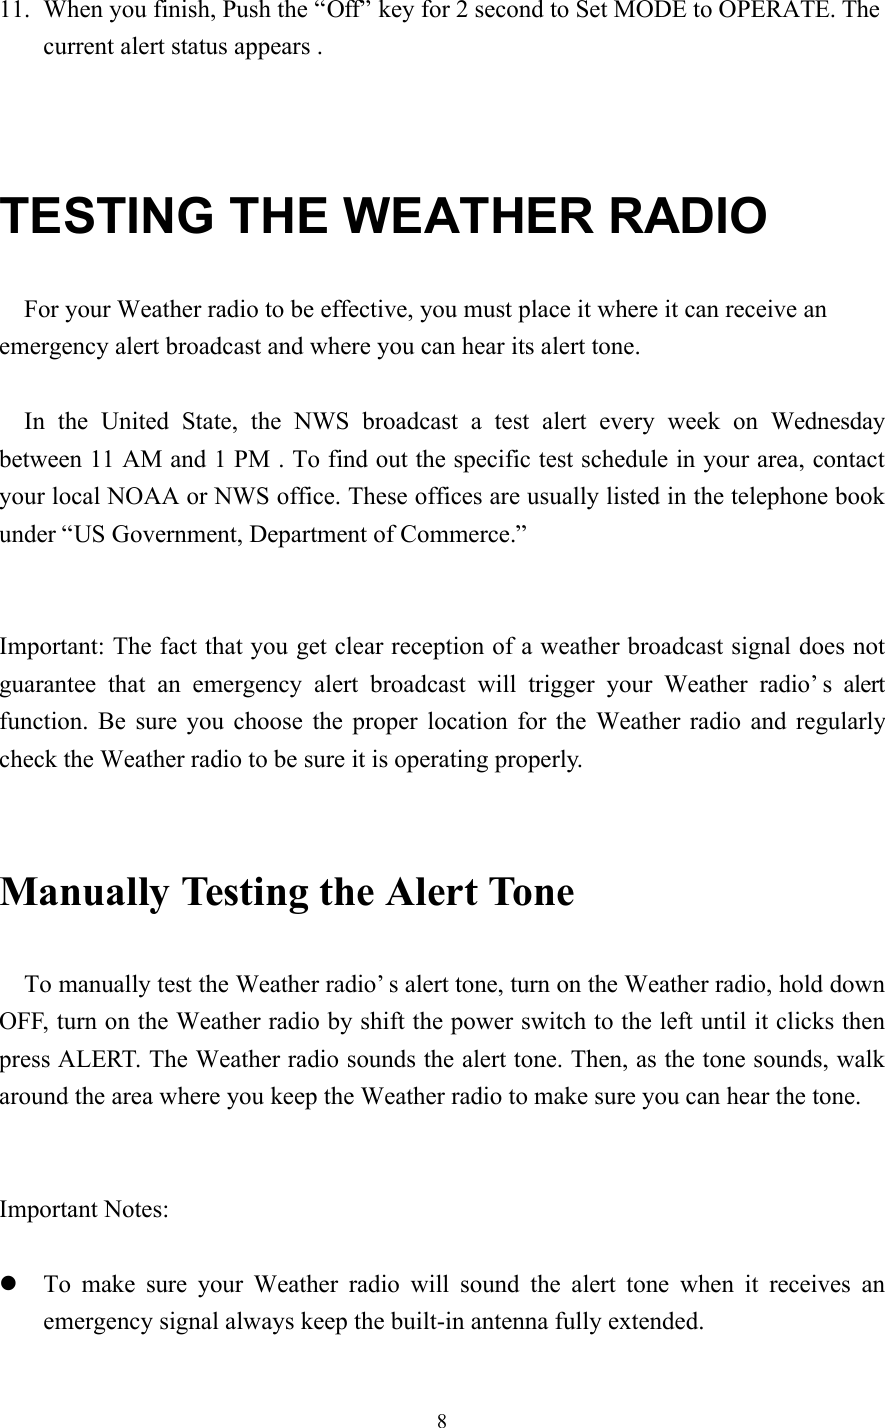 811. When you finish, Push the “Off” key for 2 second to Set MODE to OPERATE. Thecurrent alert status appears .TESTING THE WEATHER RADIOFor your Weather radio to be effective, you must place it where it can receive anemergency alert broadcast and where you can hear its alert tone.In the United State, the NWS broadcast a test alert every week on Wednesdaybetween 11 AM and 1 PM . To find out the specific test schedule in your area, contactyour local NOAA or NWS office. These offices are usually listed in the telephone bookunder “US Government, Department of Commerce.”Important: The fact that you get clear reception of a weather broadcast signal does notguarantee that an emergency alert broadcast will trigger your Weather radio’s alertfunction. Be sure you choose the proper location for the Weather radio and regularlycheck the Weather radio to be sure it is operating properly.Manually Testing the Alert ToneTo manually test the Weather radio’s alert tone, turn on the Weather radio, hold downOFF, turn on the Weather radio by shift the power switch to the left until it clicks thenpress ALERT. The Weather radio sounds the alert tone. Then, as the tone sounds, walkaround the area where you keep the Weather radio to make sure you can hear the tone.Important Notes:l To make sure your Weather radio will sound the alert tone when it receives anemergency signal always keep the built-in antenna fully extended.